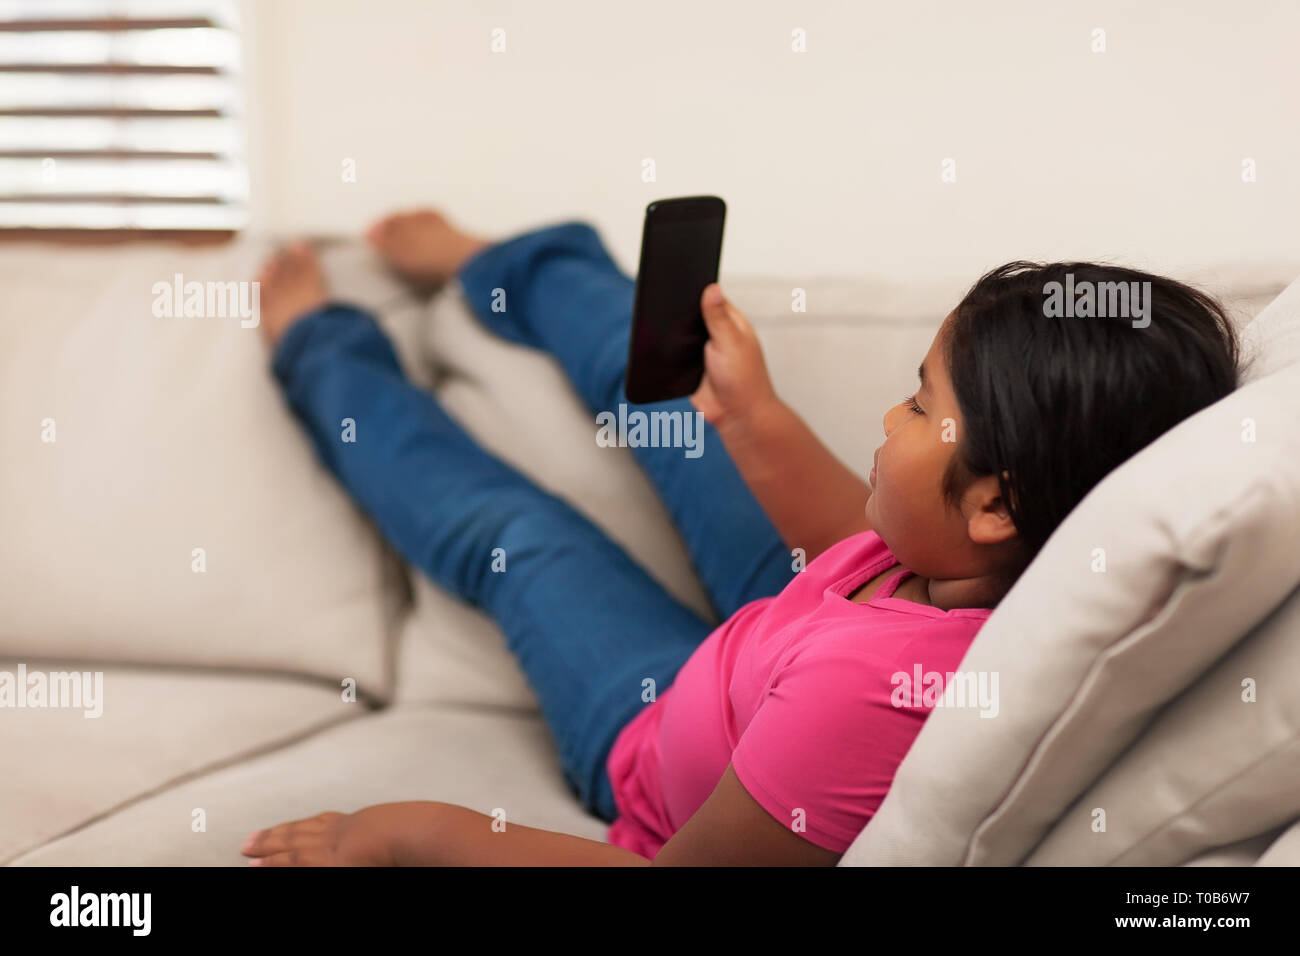 Mixed race 8 year old girl watching mobile phone while stretching out her legs; sitting on a couch with a relaxed pose. Stock Photo